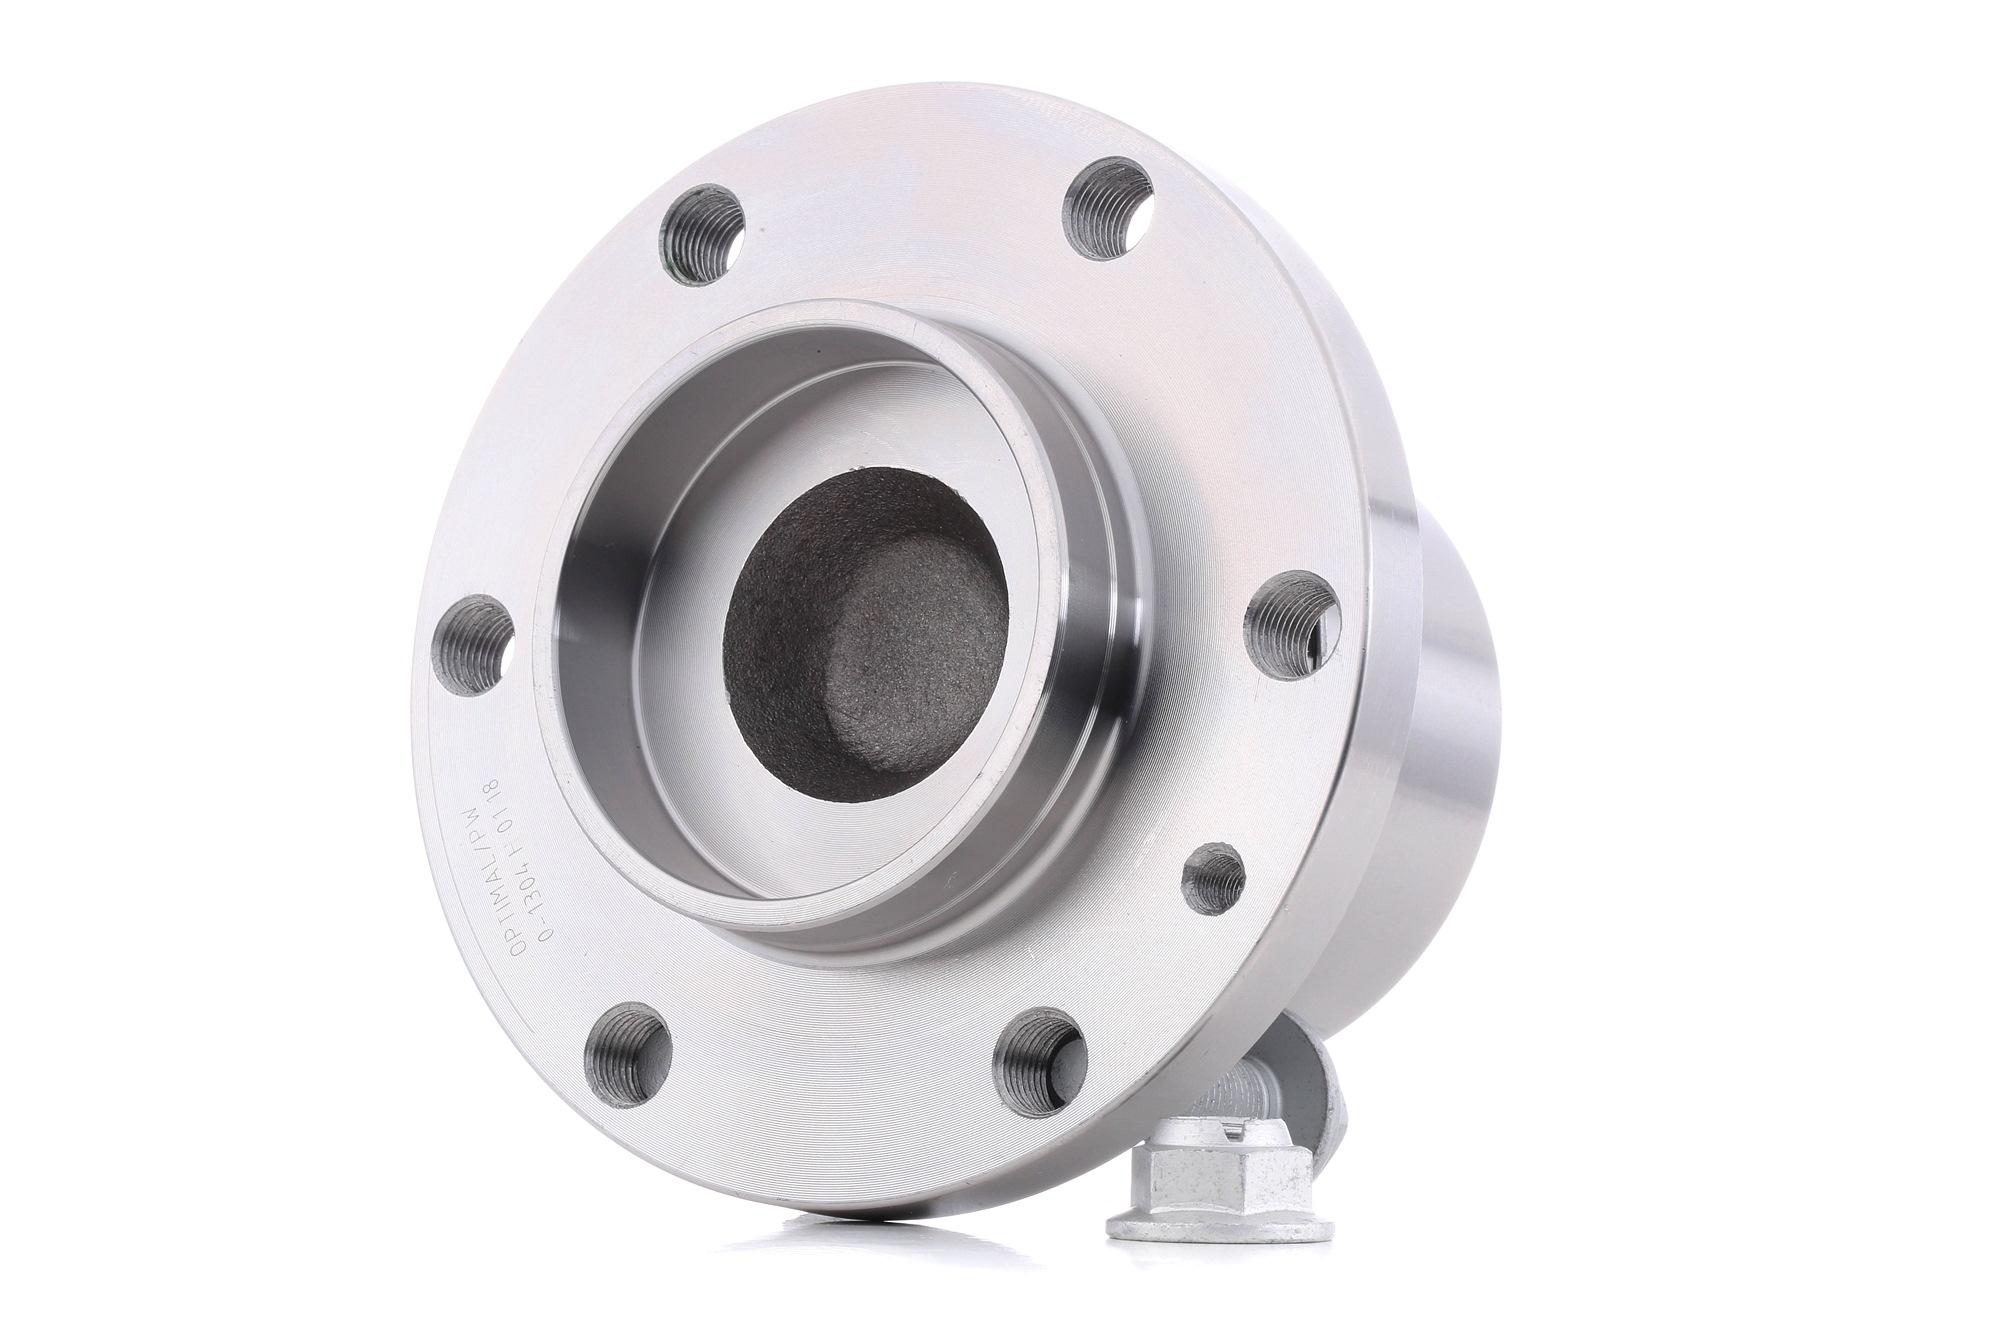 OPTIMAL 401901 Wheel bearing kit with integrated magnetic sensor ring, Requires special tools for mounting, 152 mm